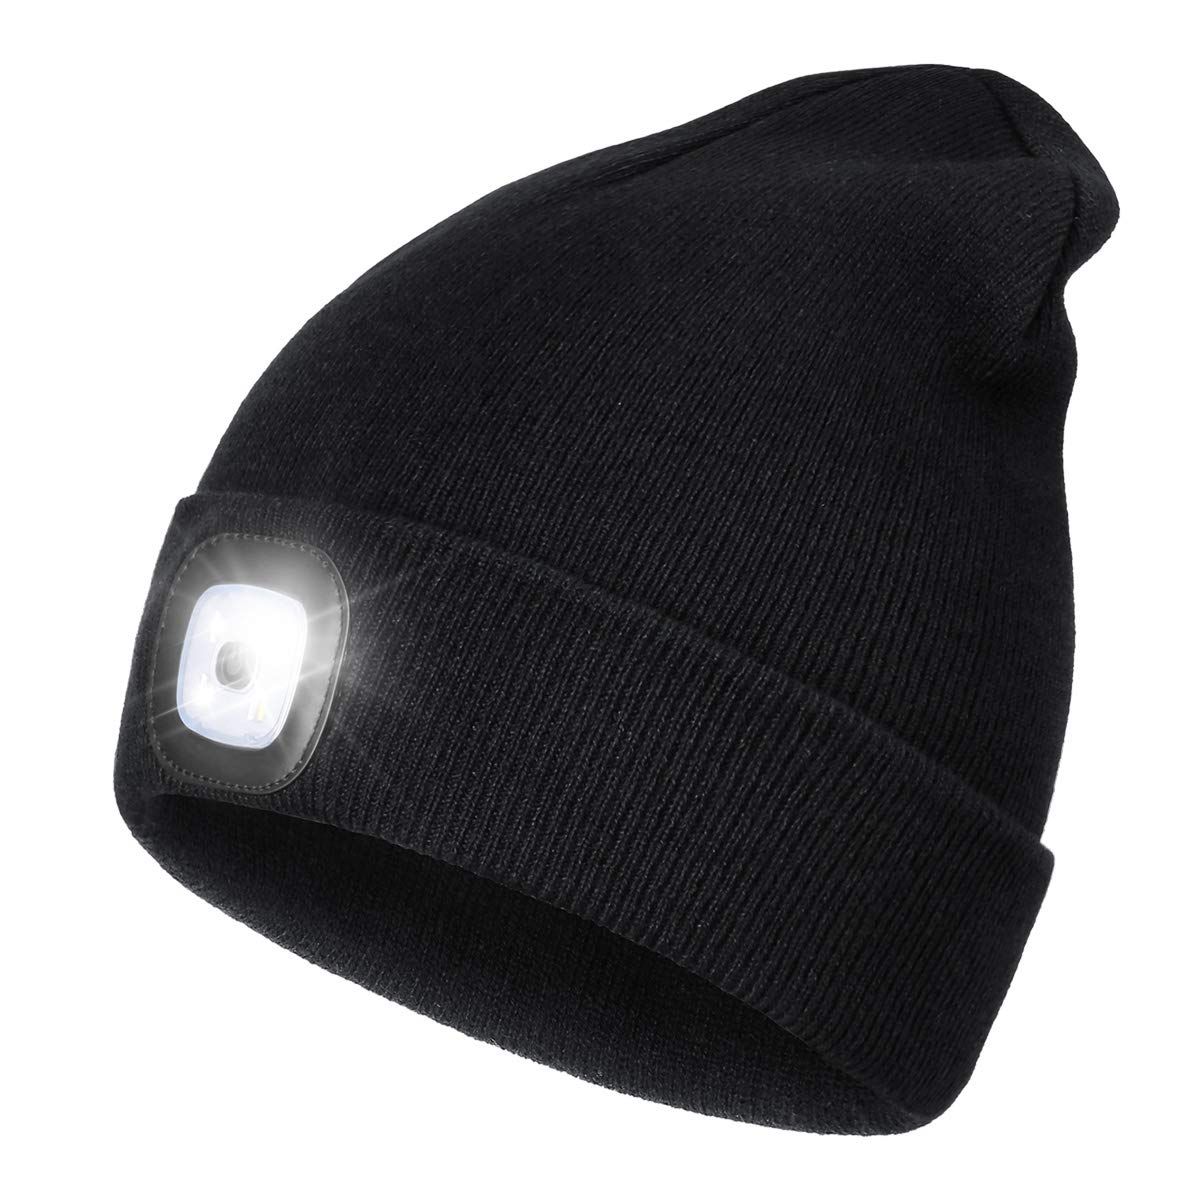 LED Beanie Hat with Light,Unisex USB Rechargeable Hands Free 4 LED Headlamp Cap Winter Knitted Night | Amazon (US)